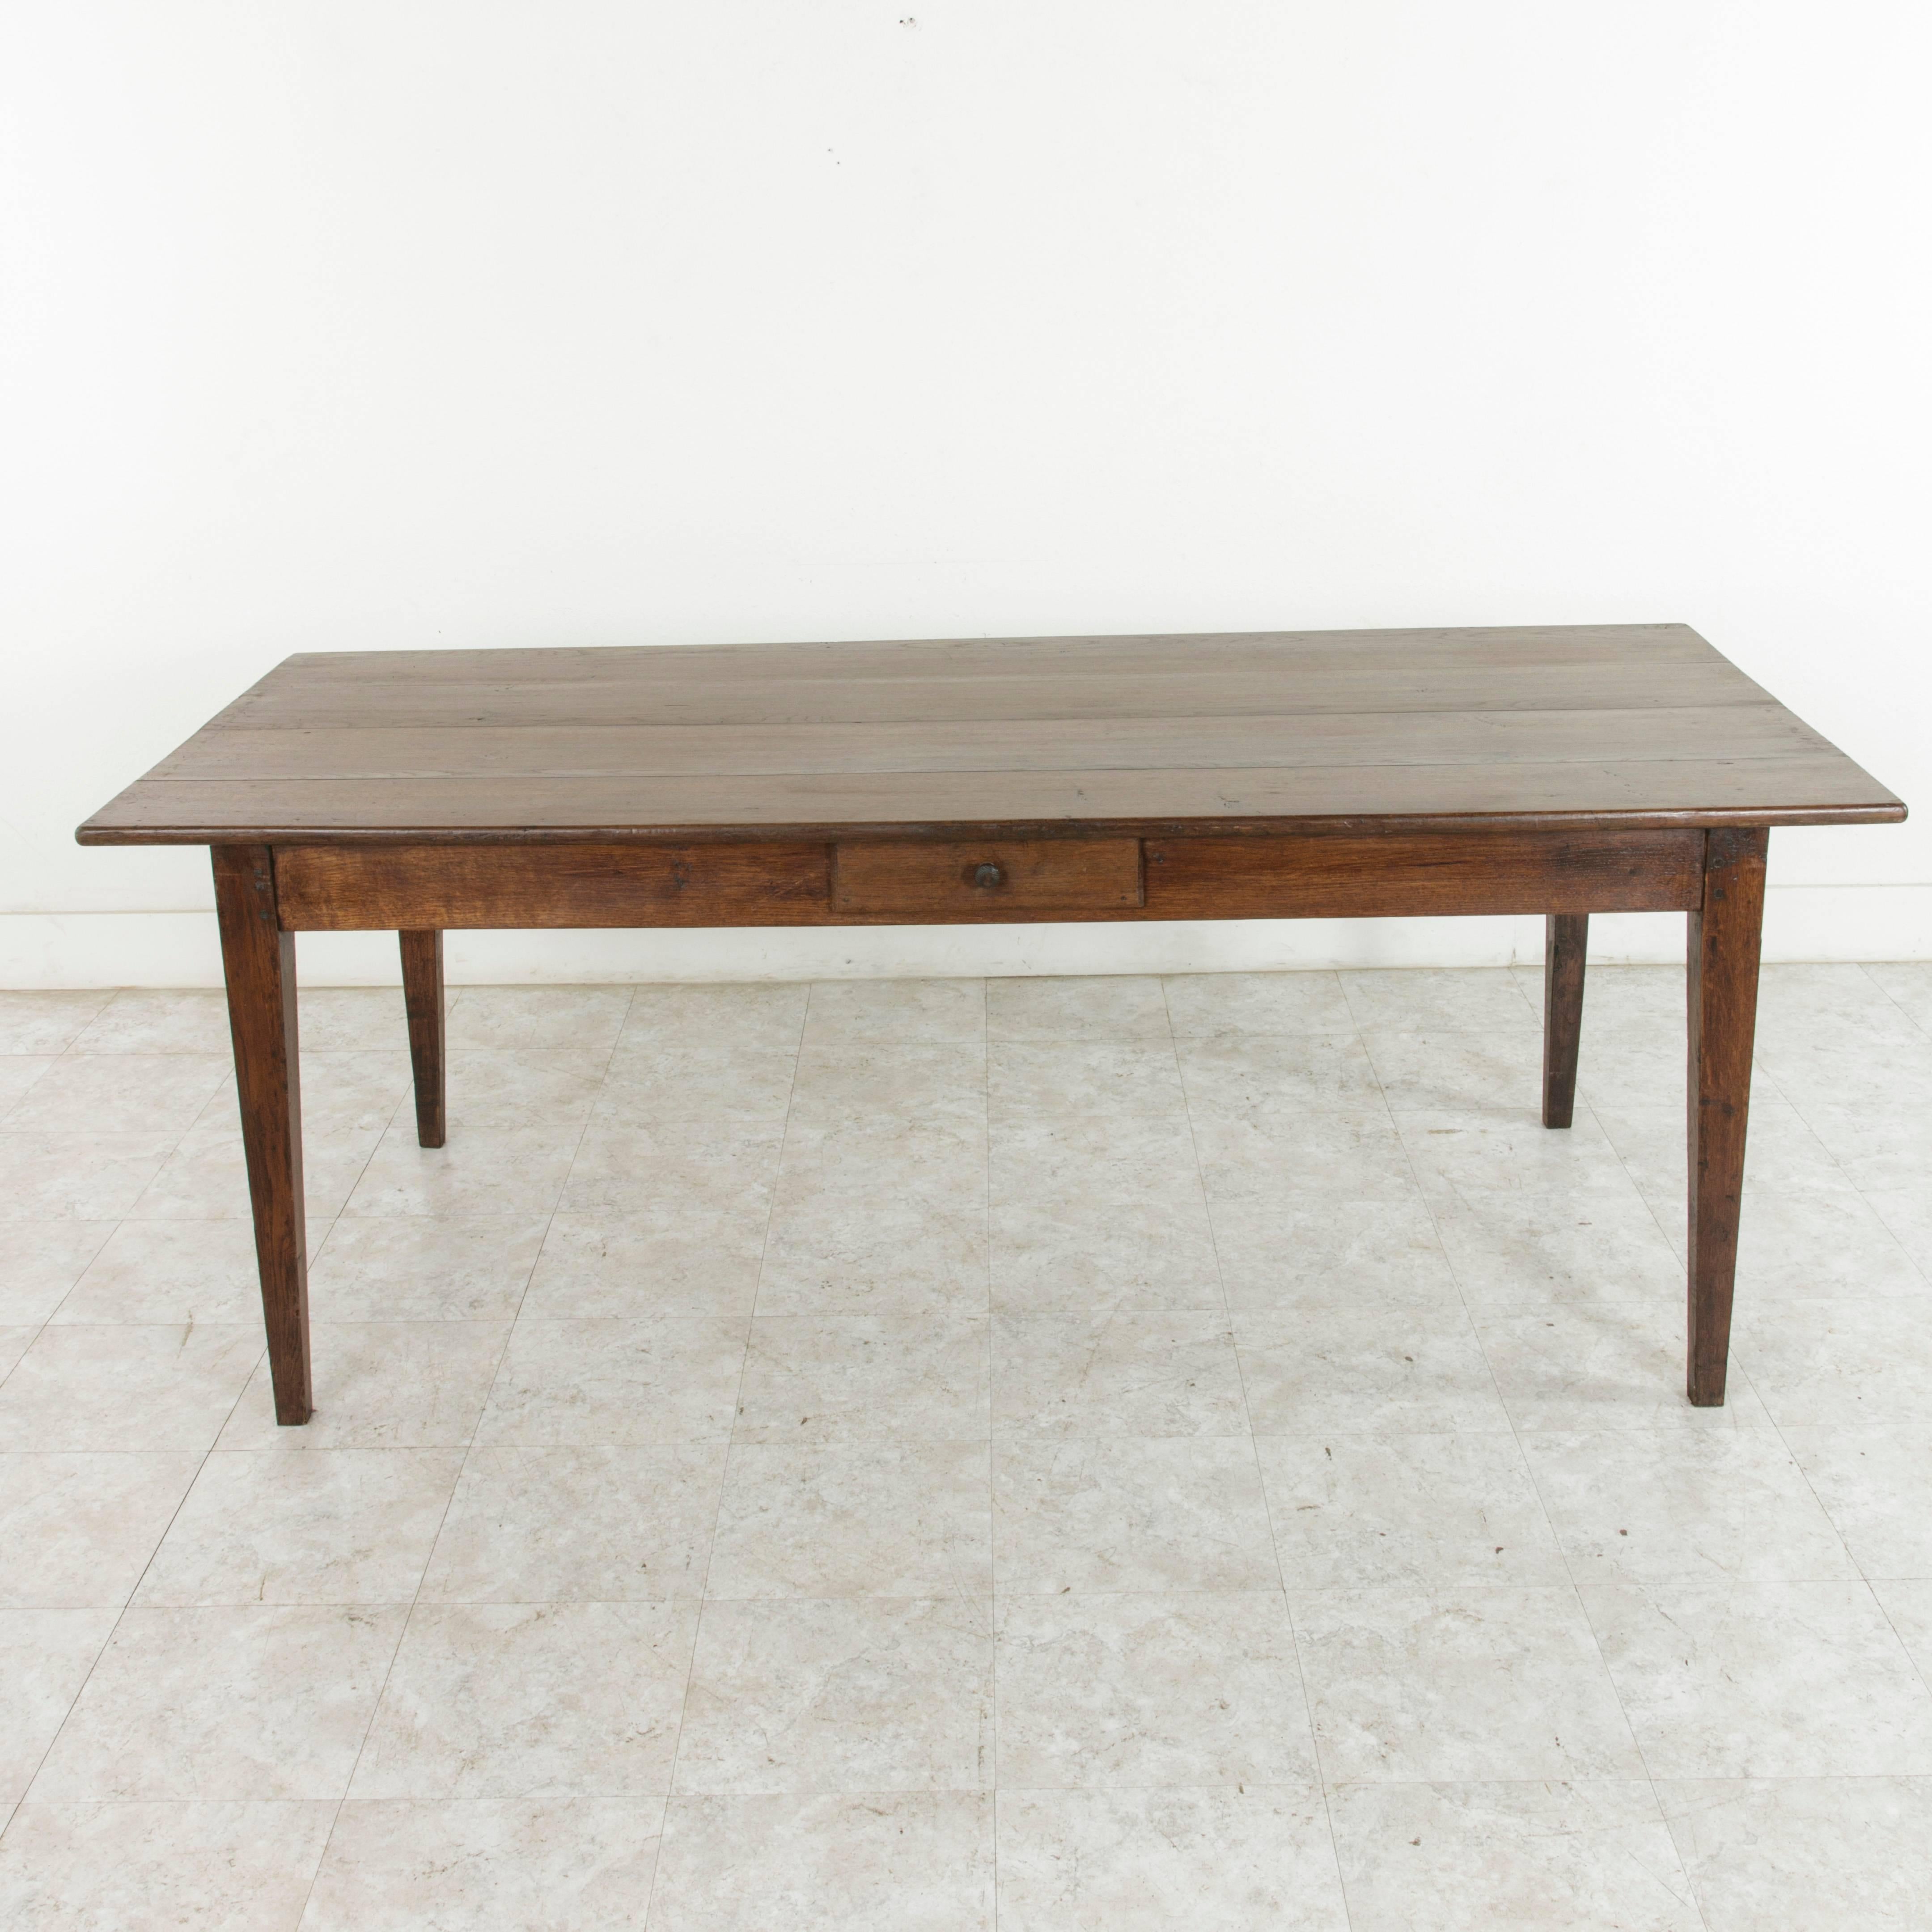 Originating from the region of Le Perche, a sub-region of Normandy France, this artisan-made, hand pegged oak farm table or dining table dates to the turn of the twentieth century. Its top is constructed of four wide planks and rests on tapered